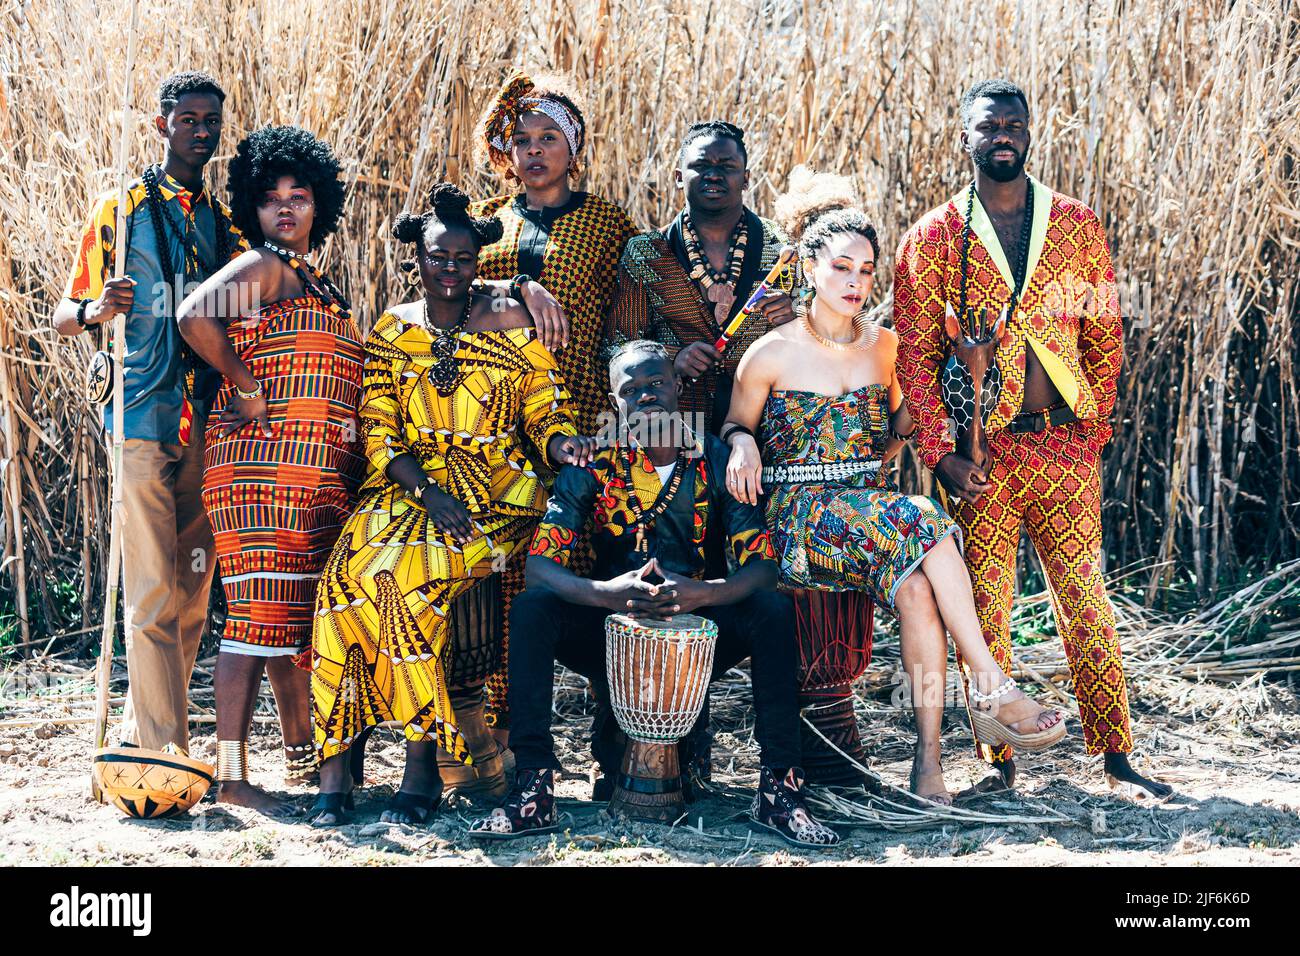 Full body group of black and mixed race women and men in colorful authentic African outfits with sticks and drums sitting and standing against dry fie Stock Photo